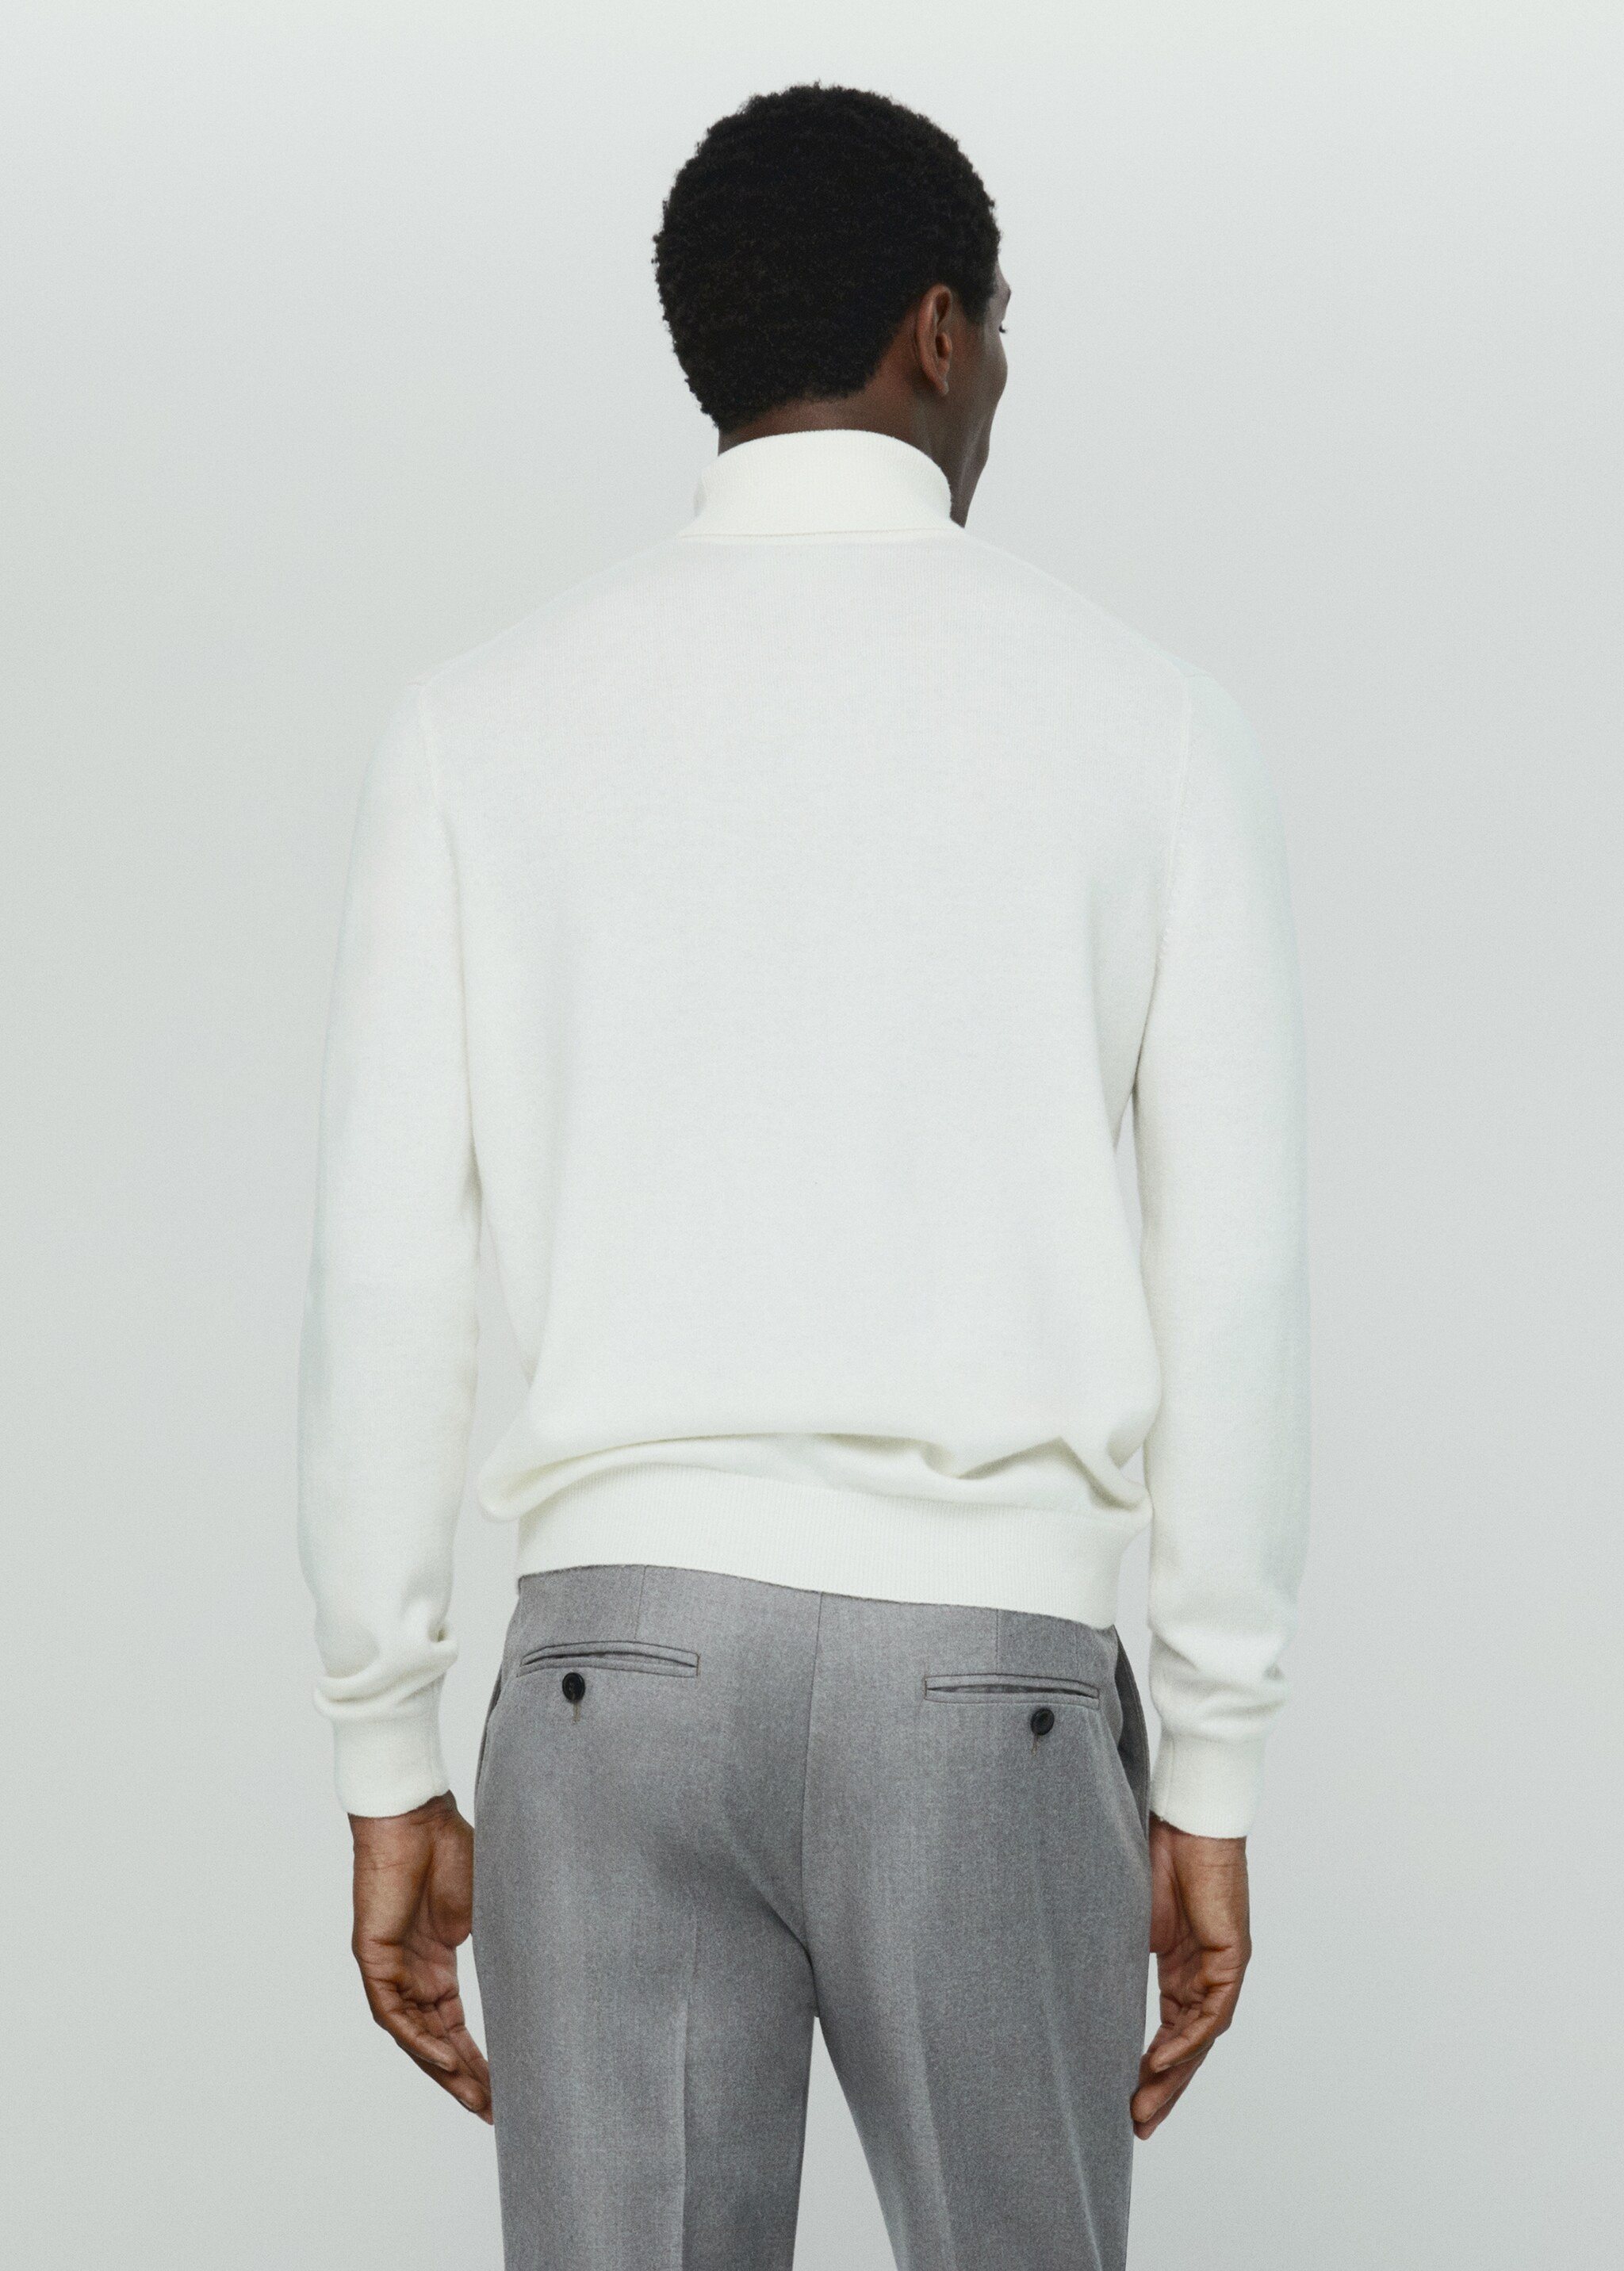 Turtleneck 100% cashmere sweater - Reverse of the article